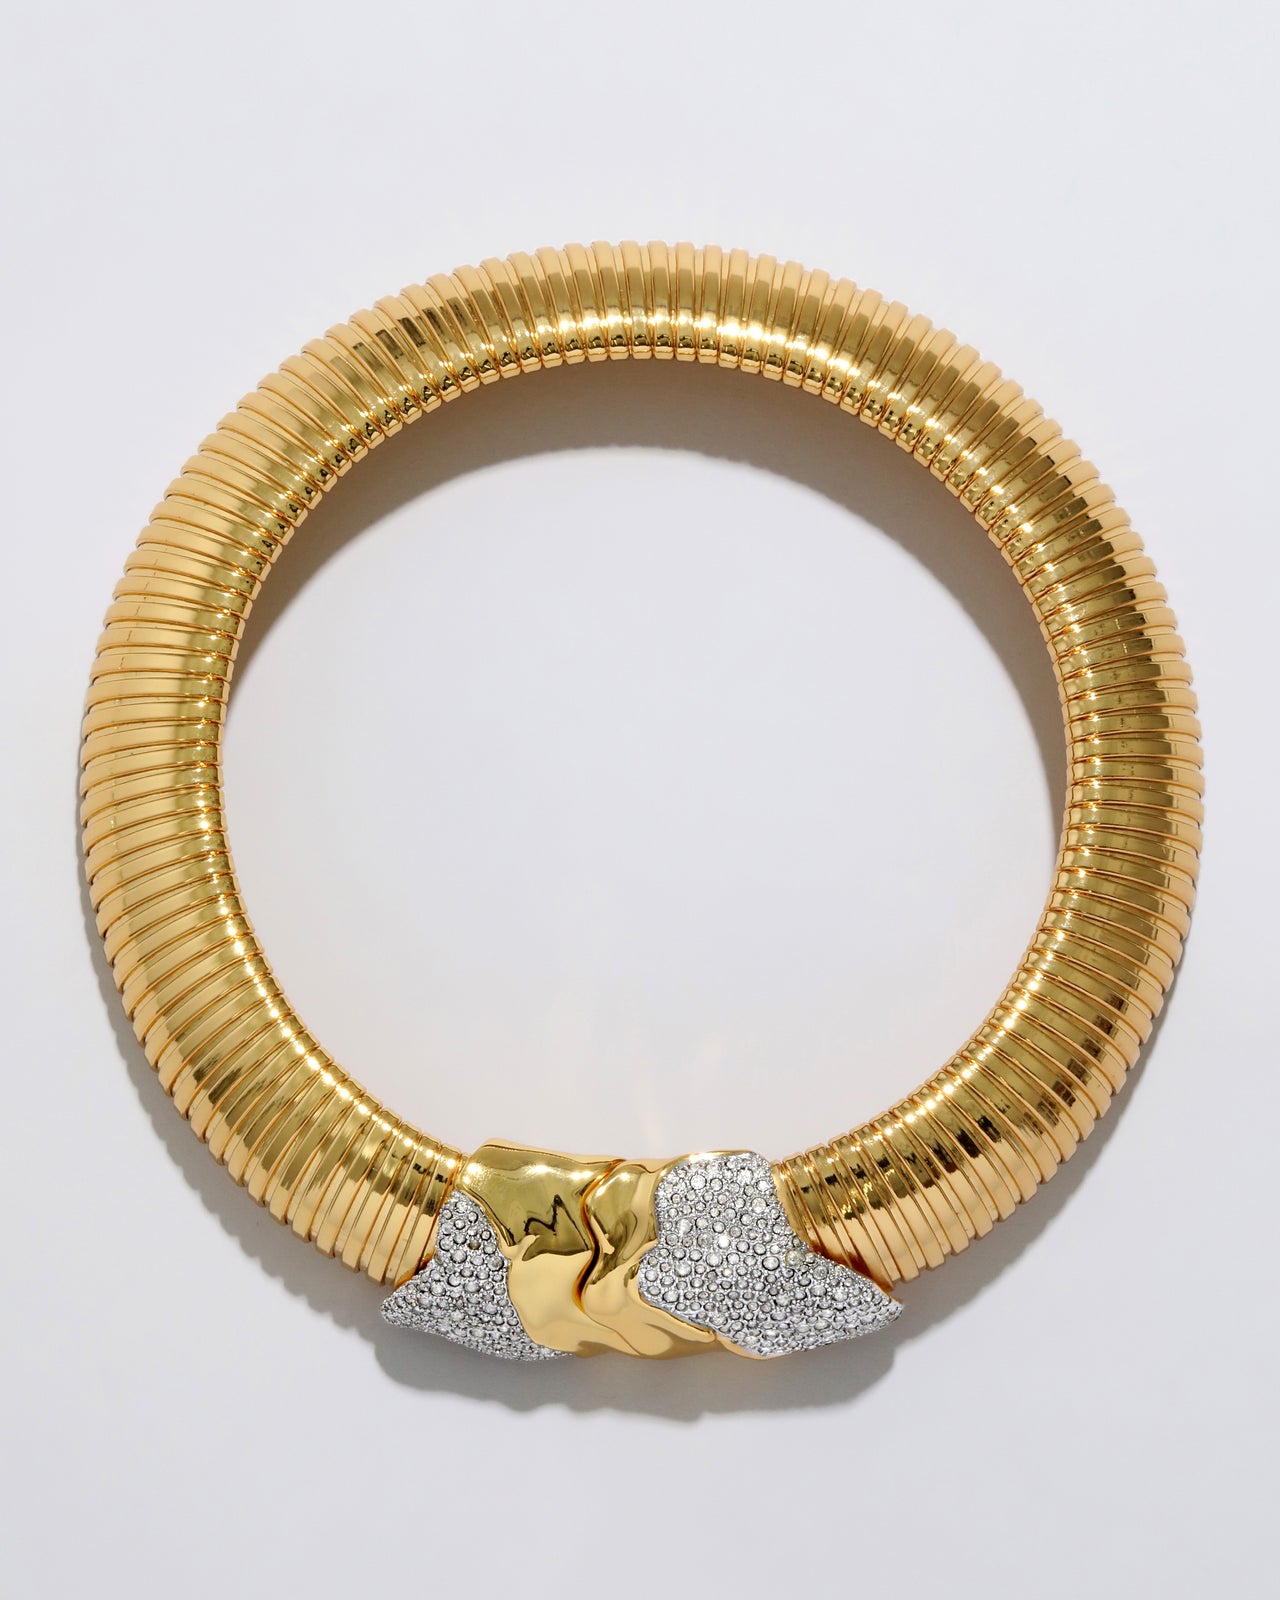 Solanales Gold Tubogas Collar Necklace - Photo 2